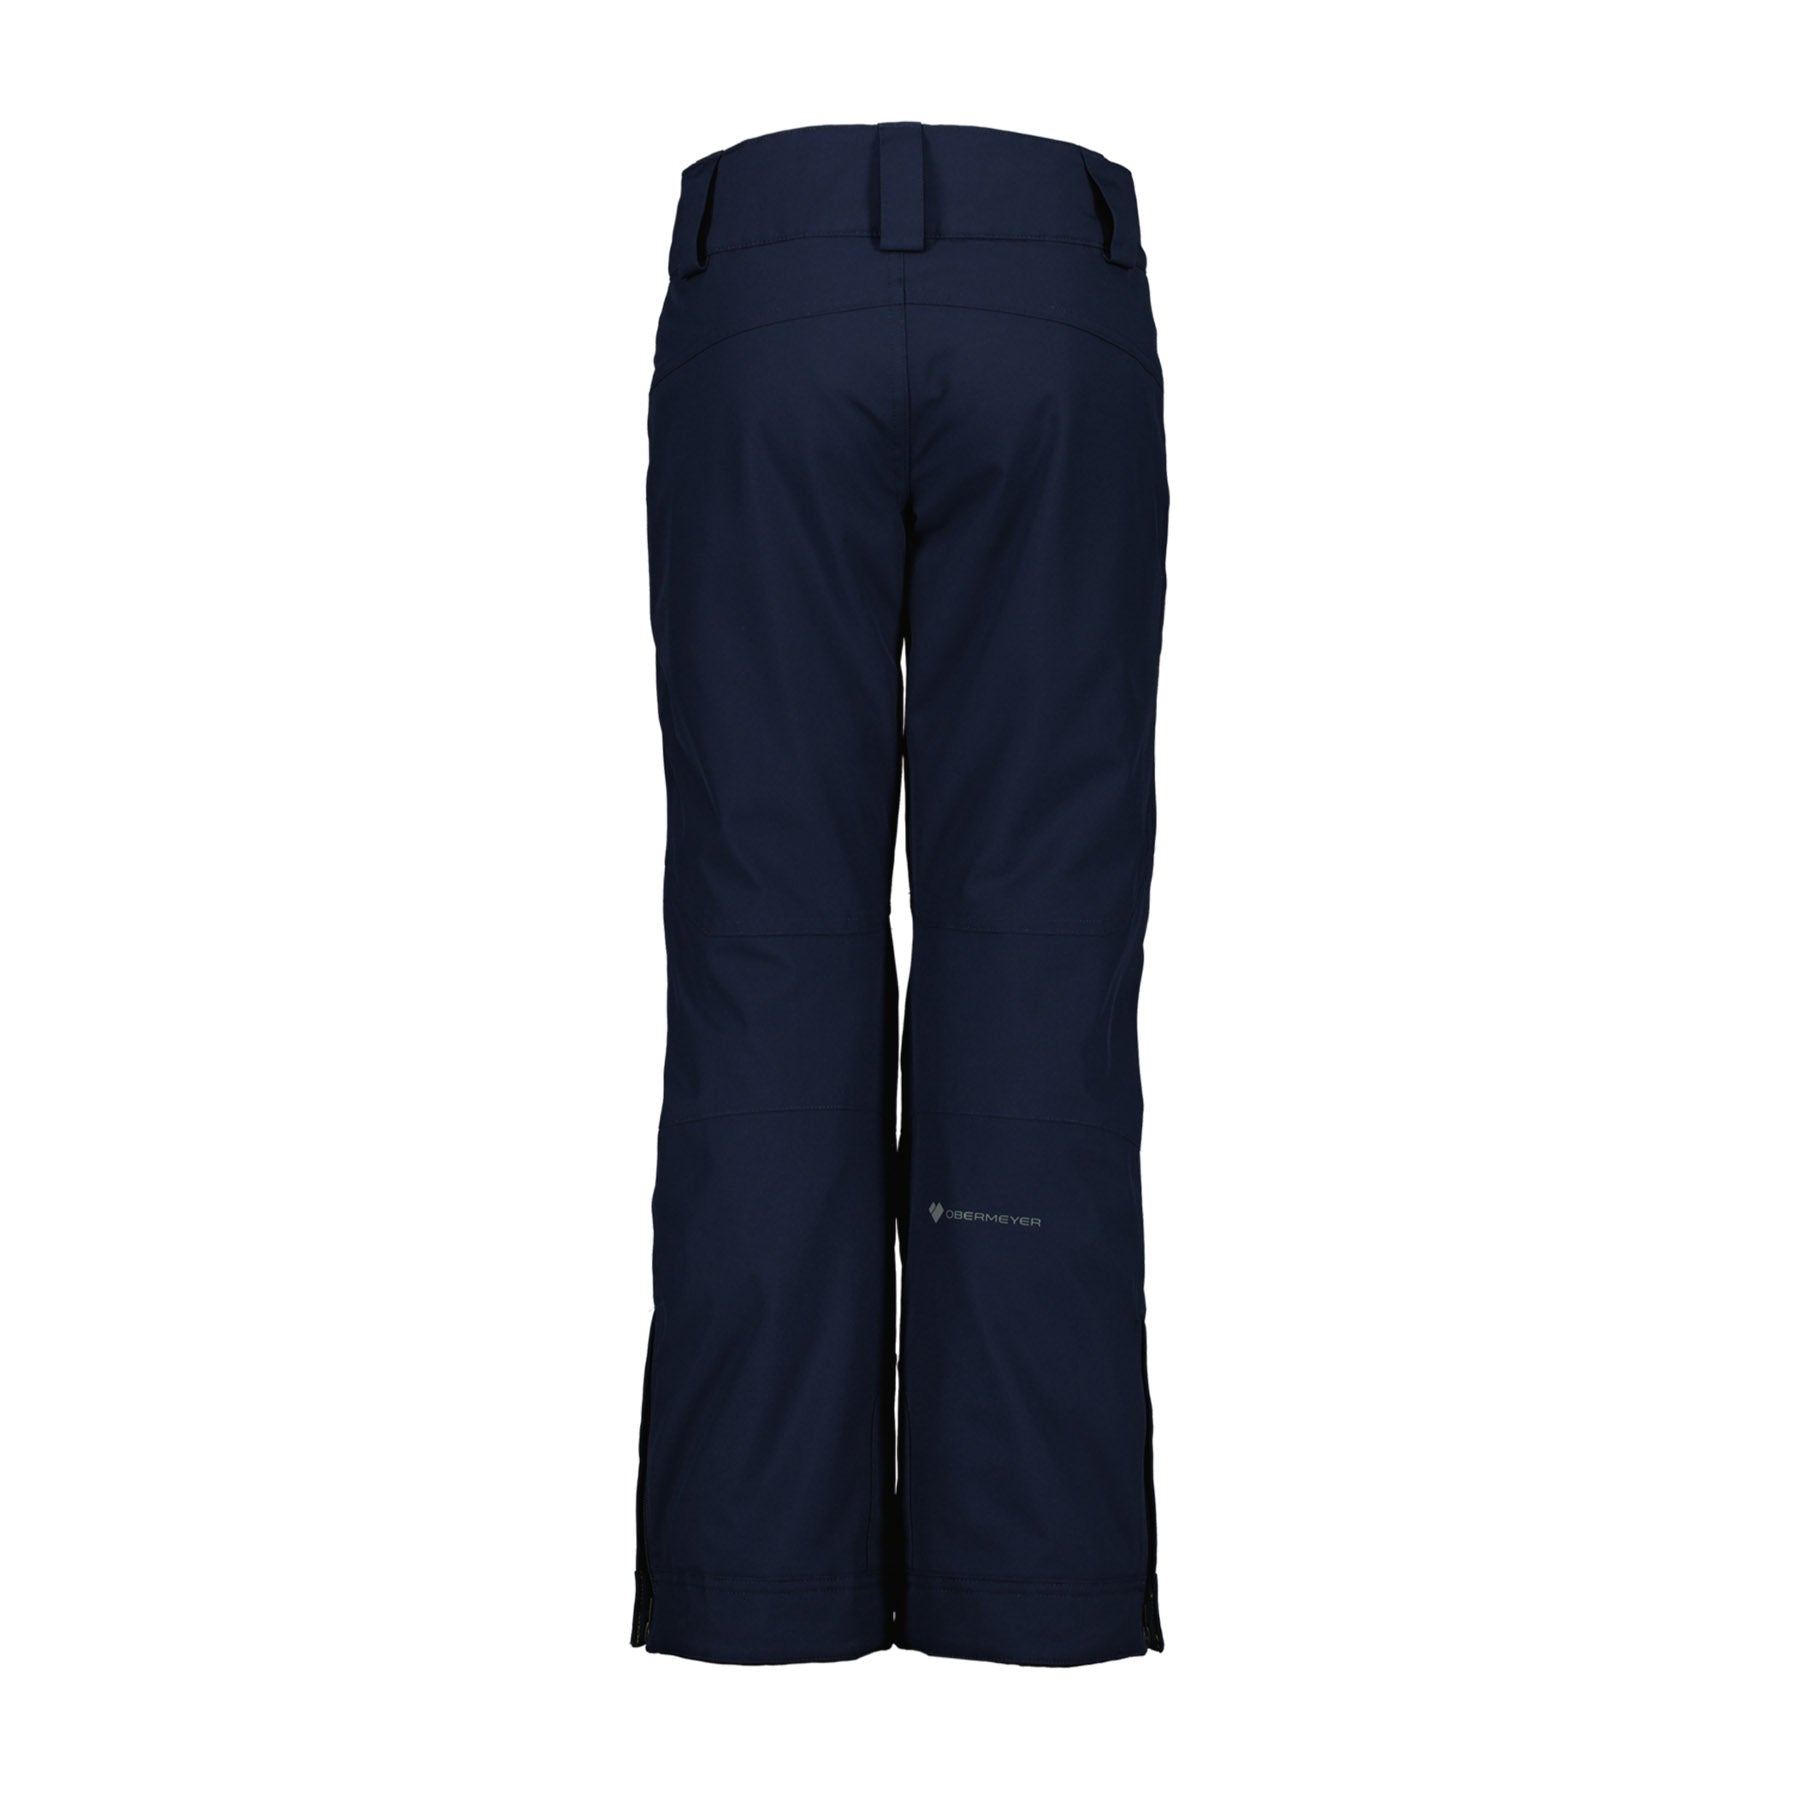 Hero image featuring the back of the Obermeyer kids Parker Pant in admiral blue.